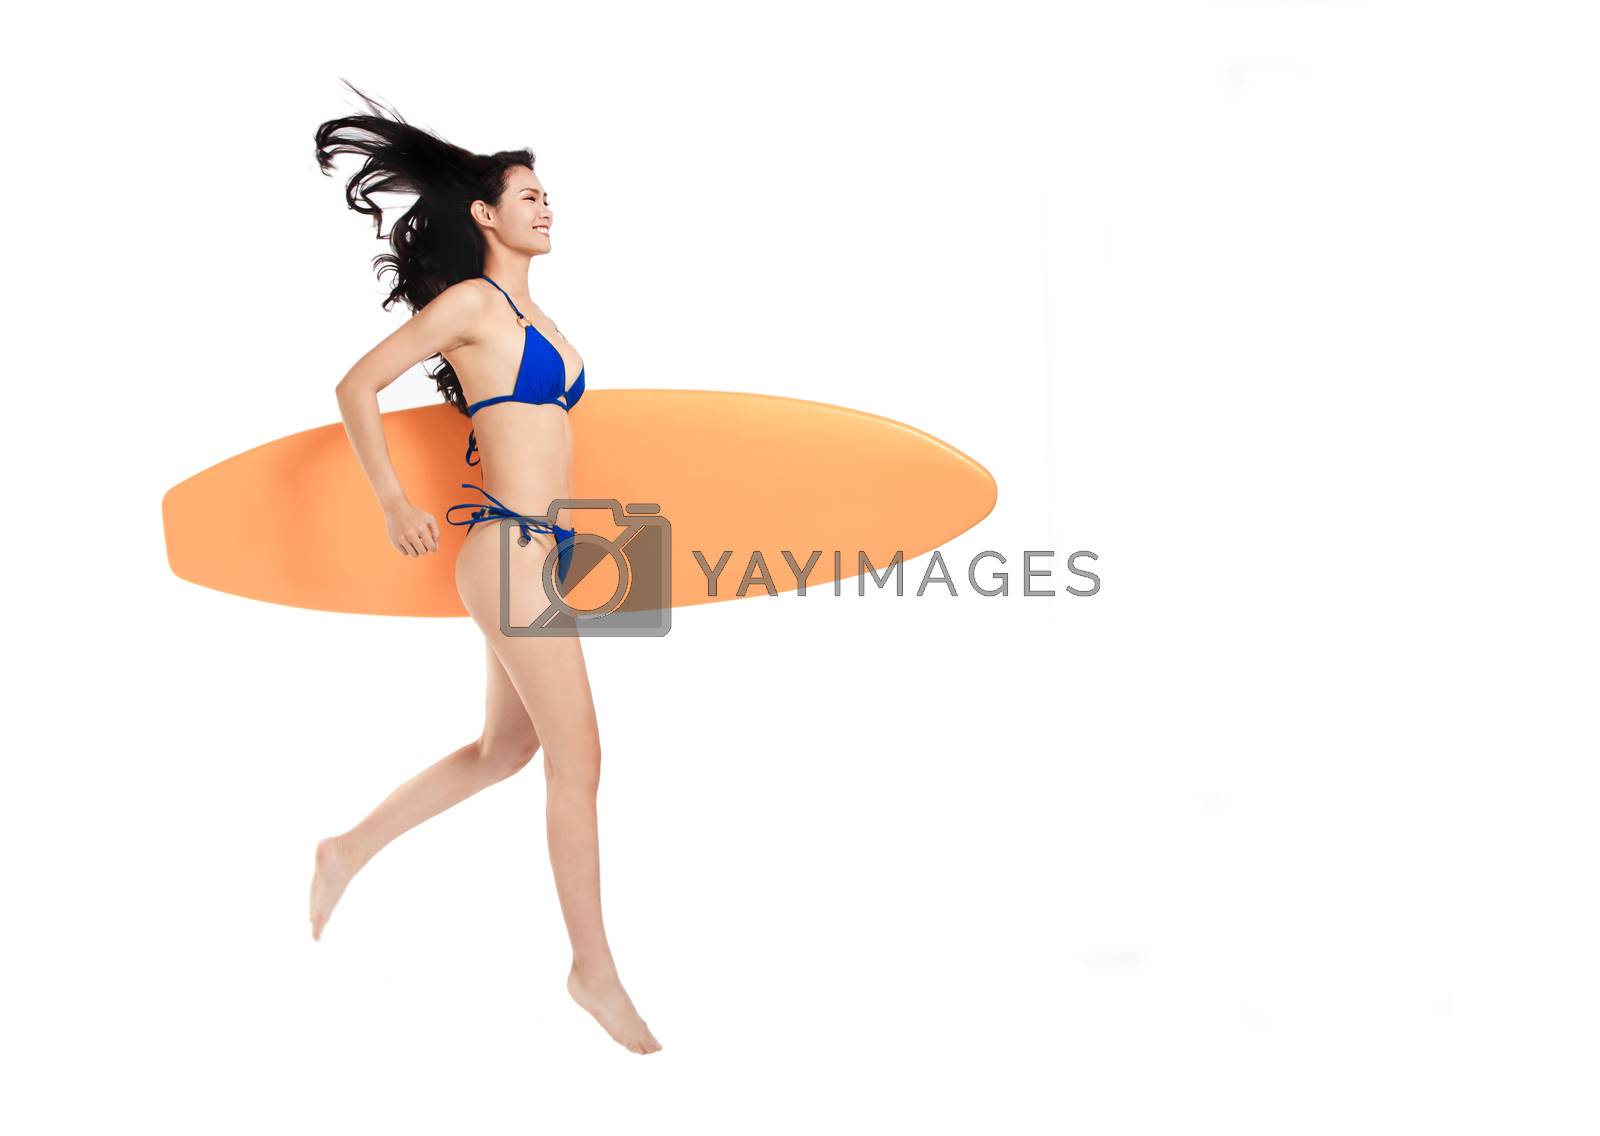 Royalty free image of side view Beautiful young woman holding surfboard and running . isolated on white by tomwang